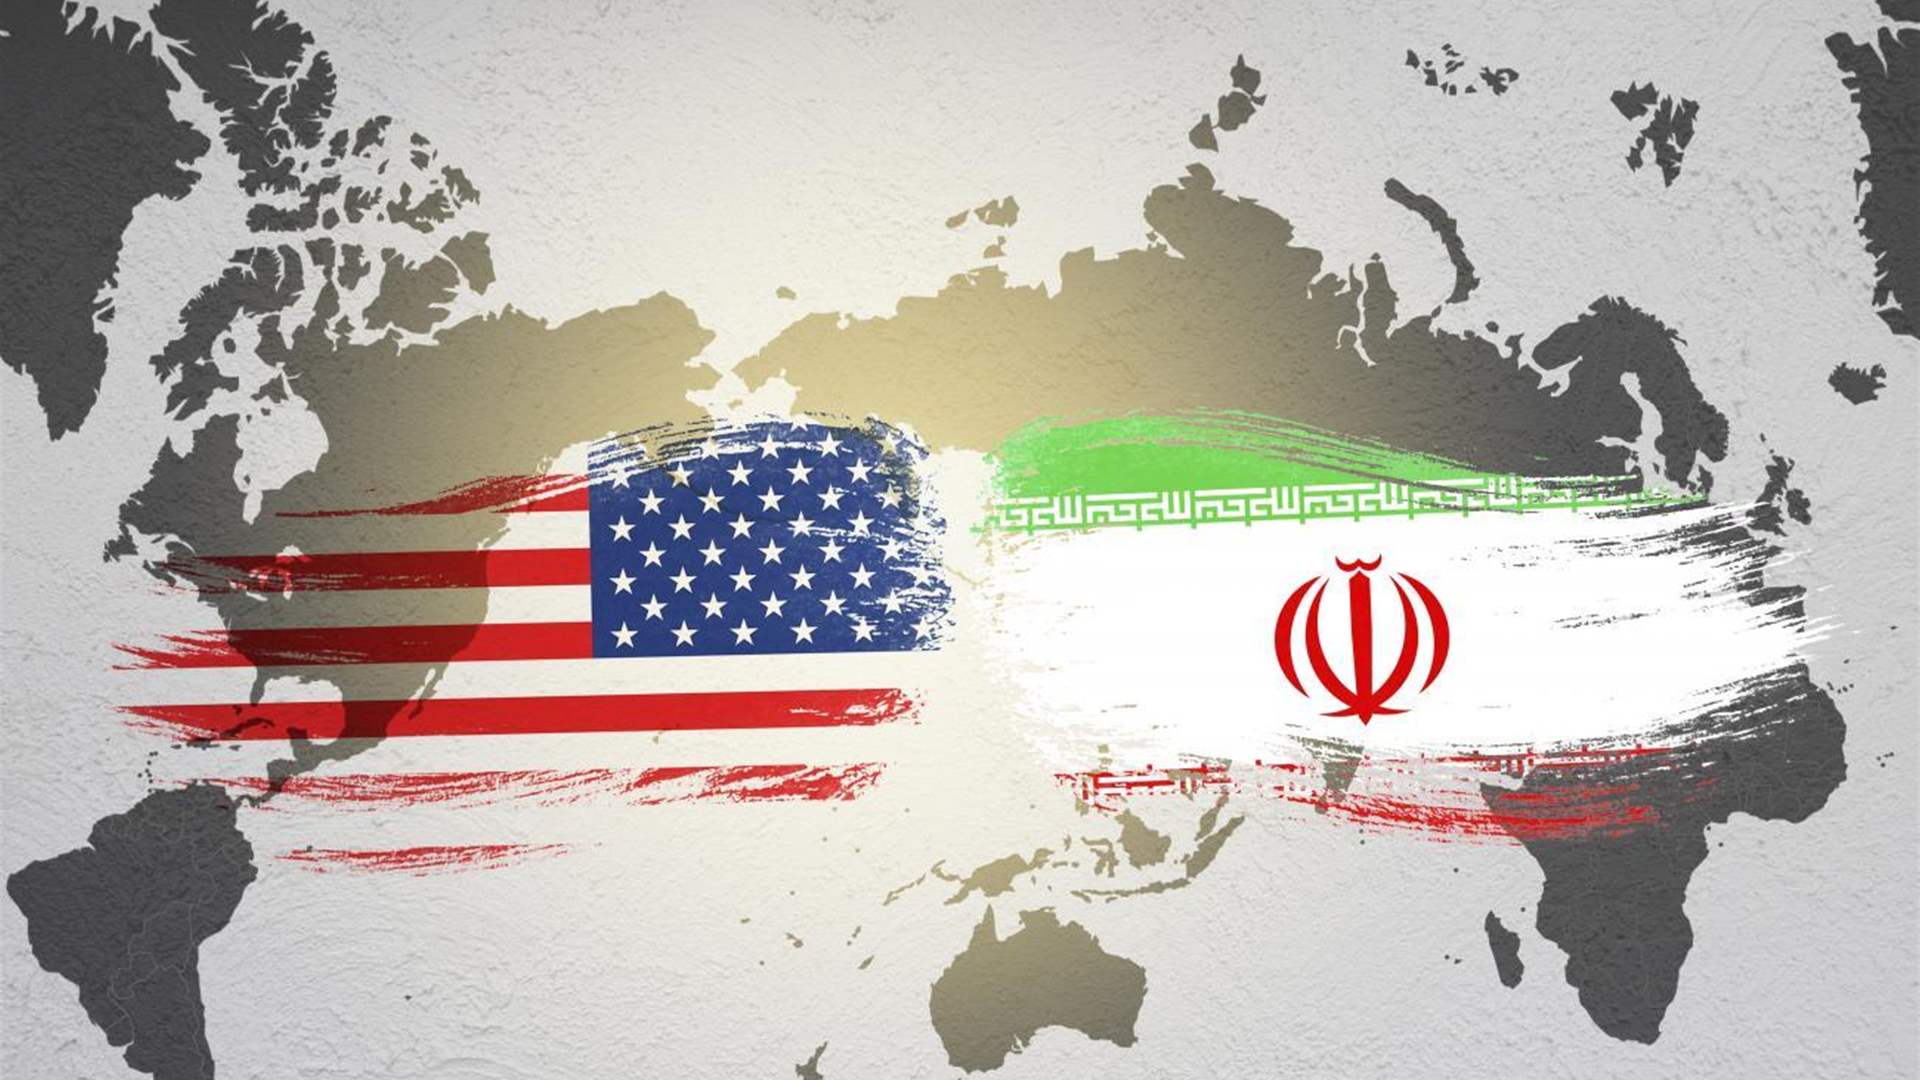 Turning the page: A new chapter in Iran-US relations